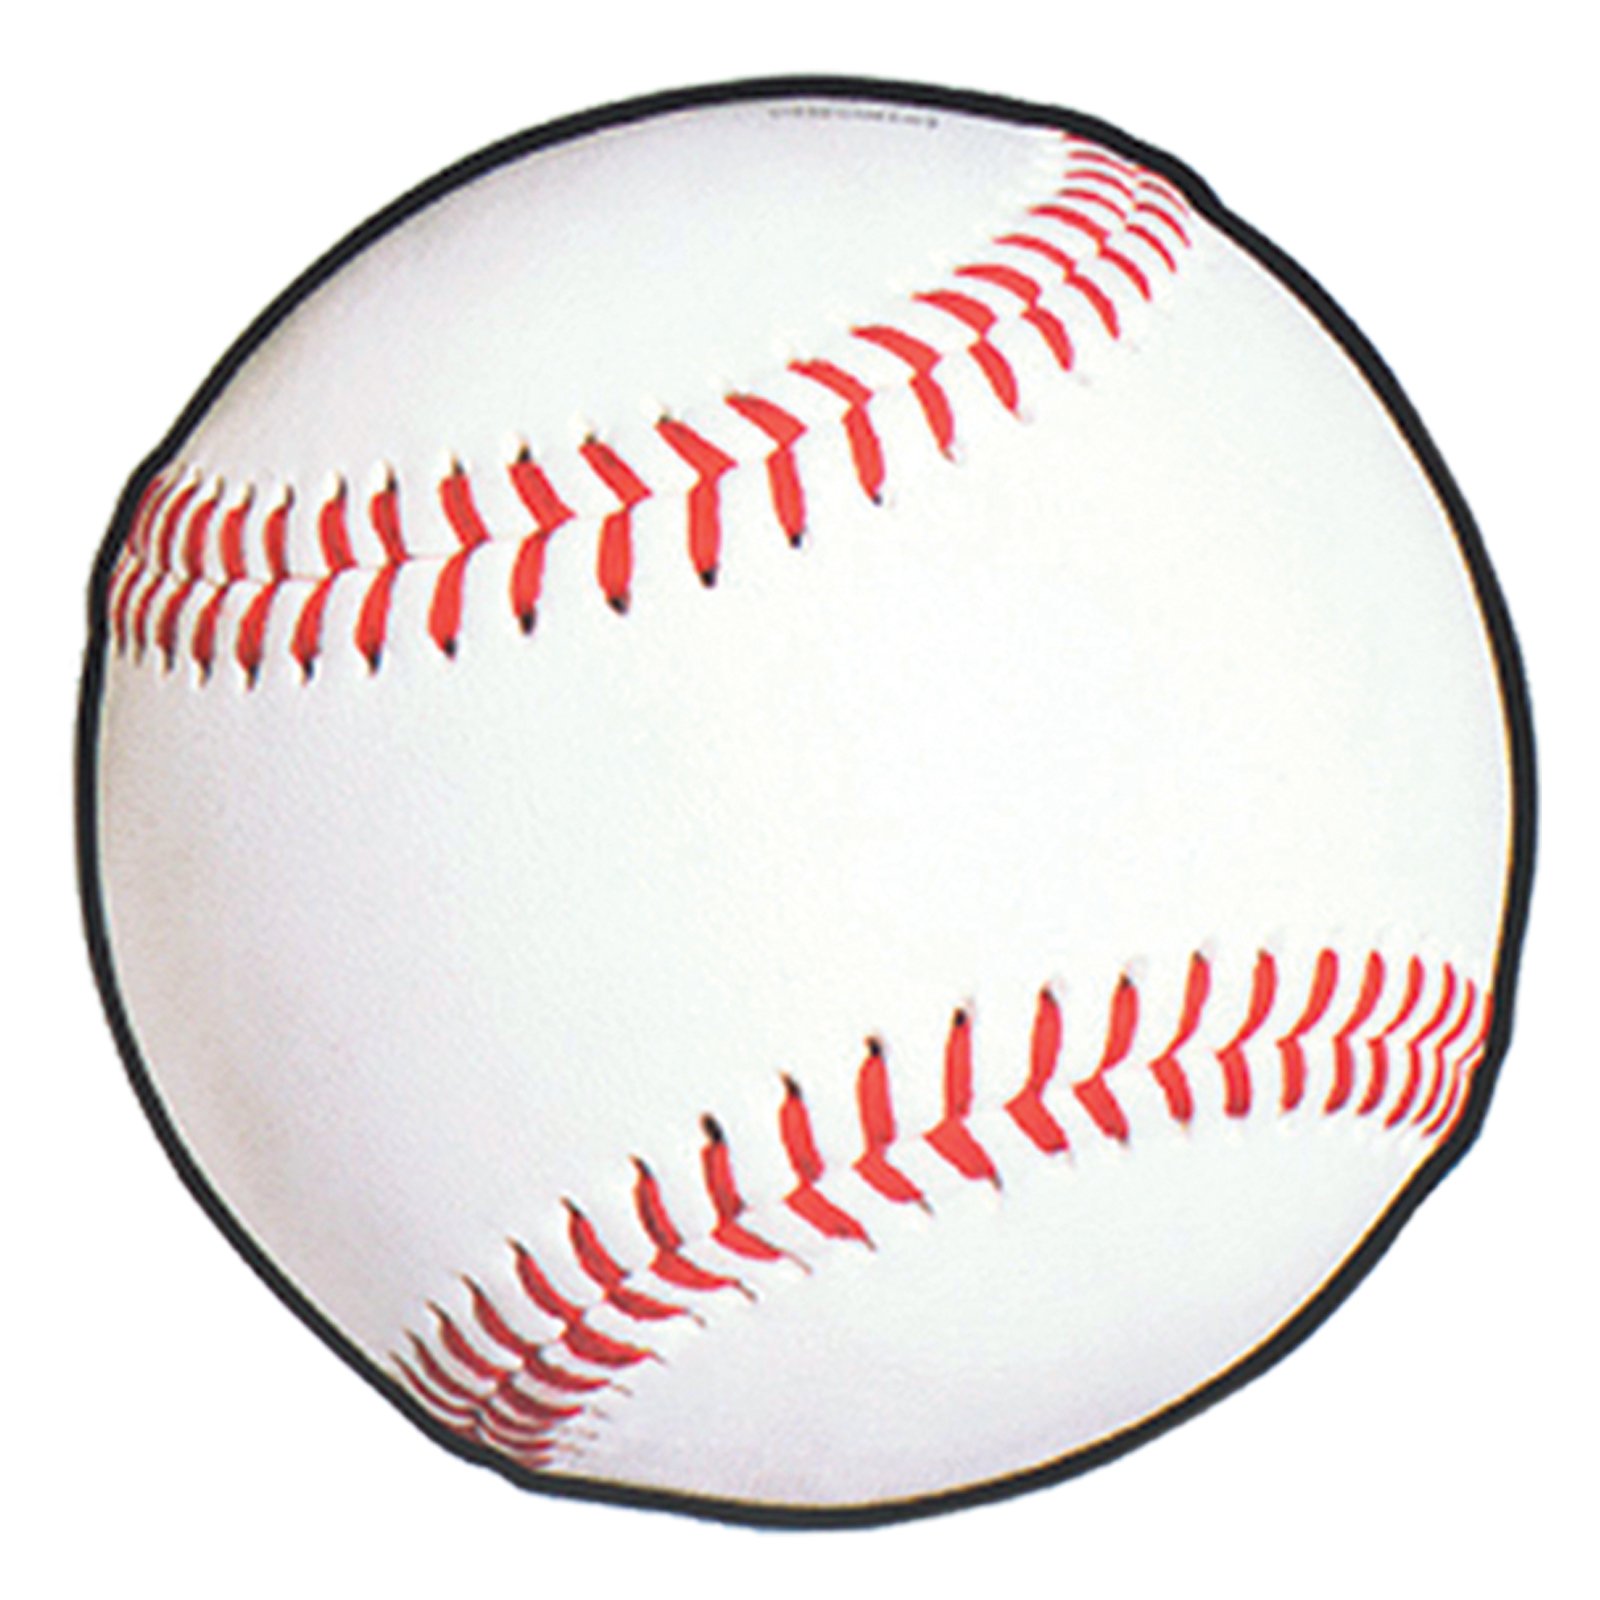 free baseball clipart for t shirts - photo #41